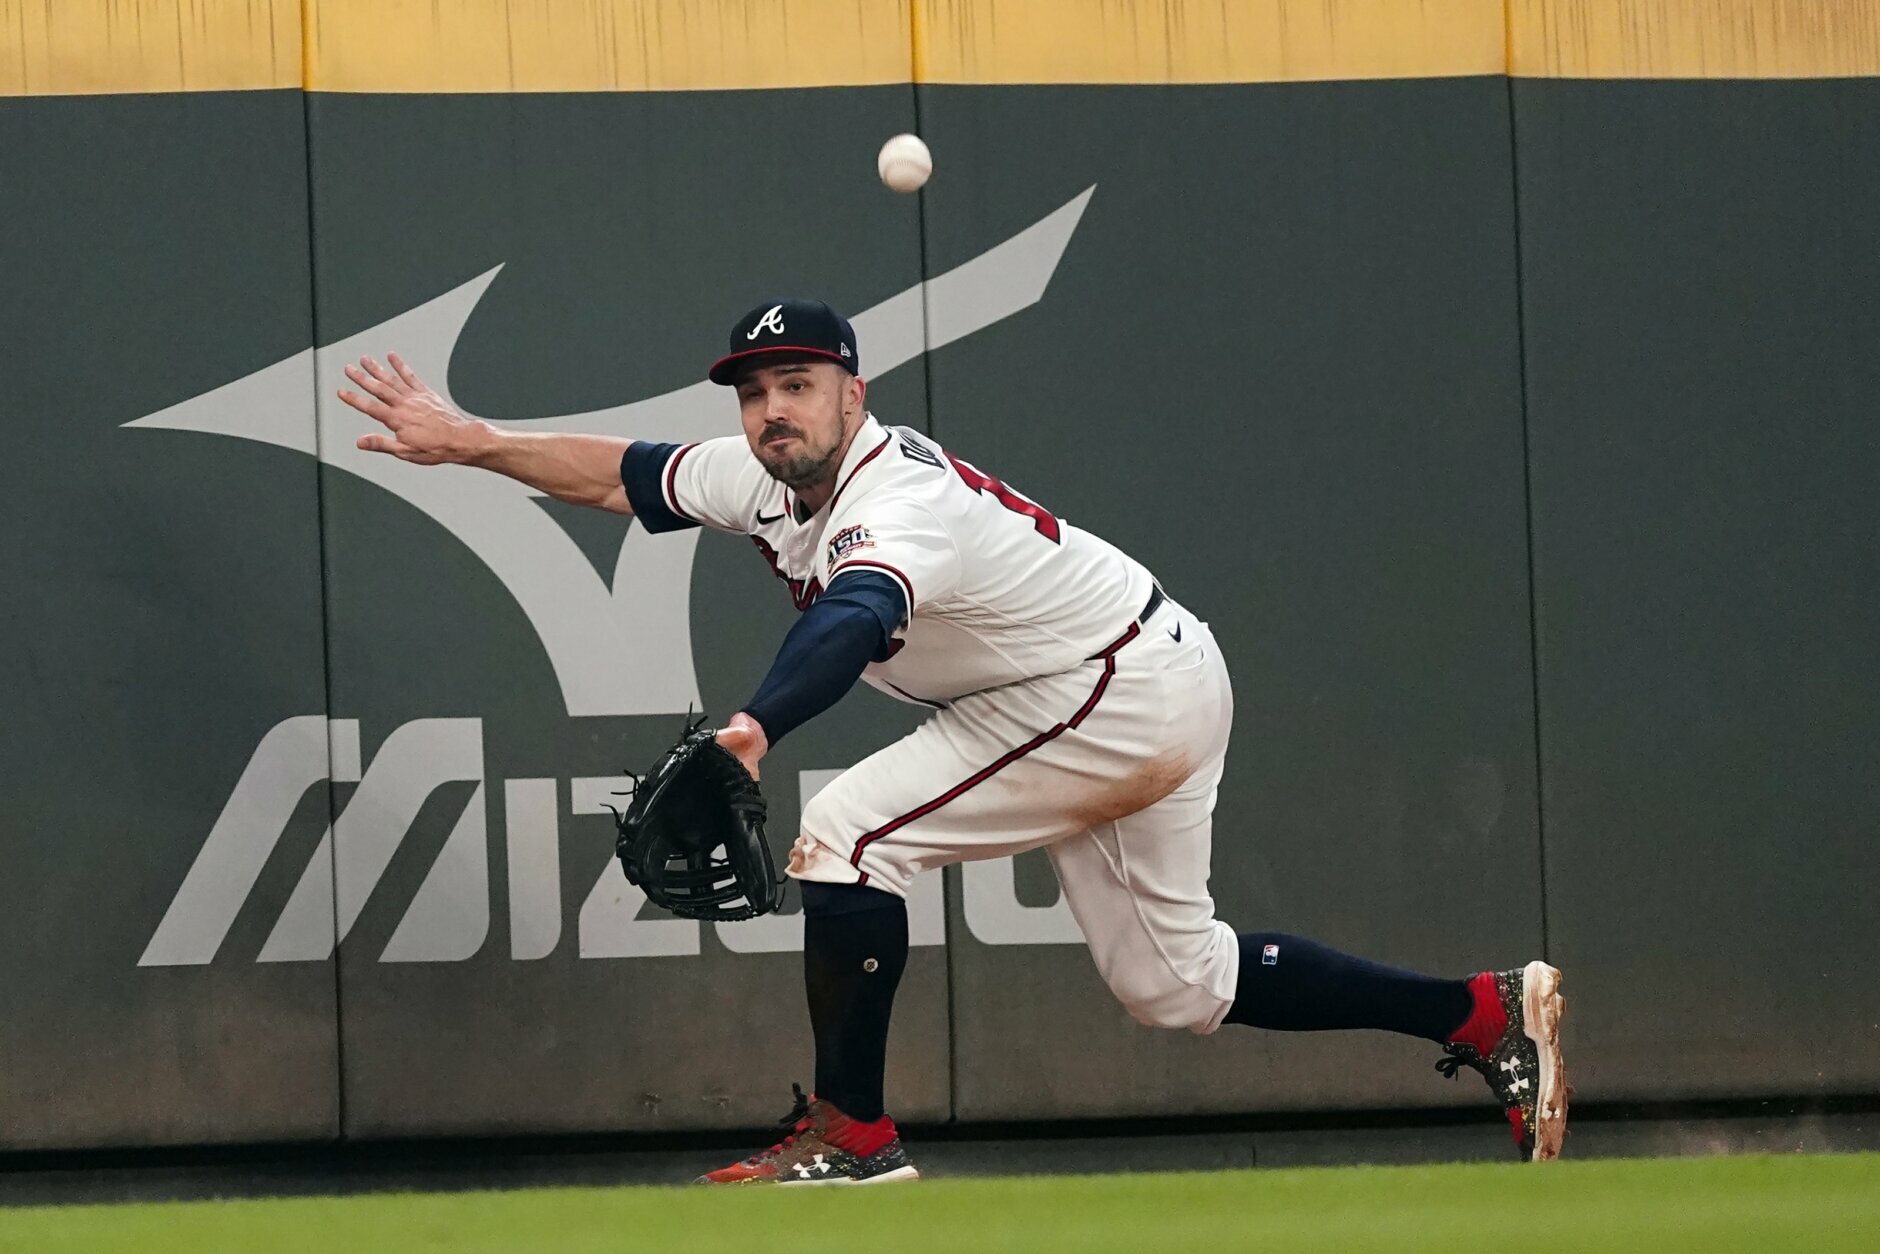 Braves reach 100 wins again, beat Nationals 8-5 behind Strider to